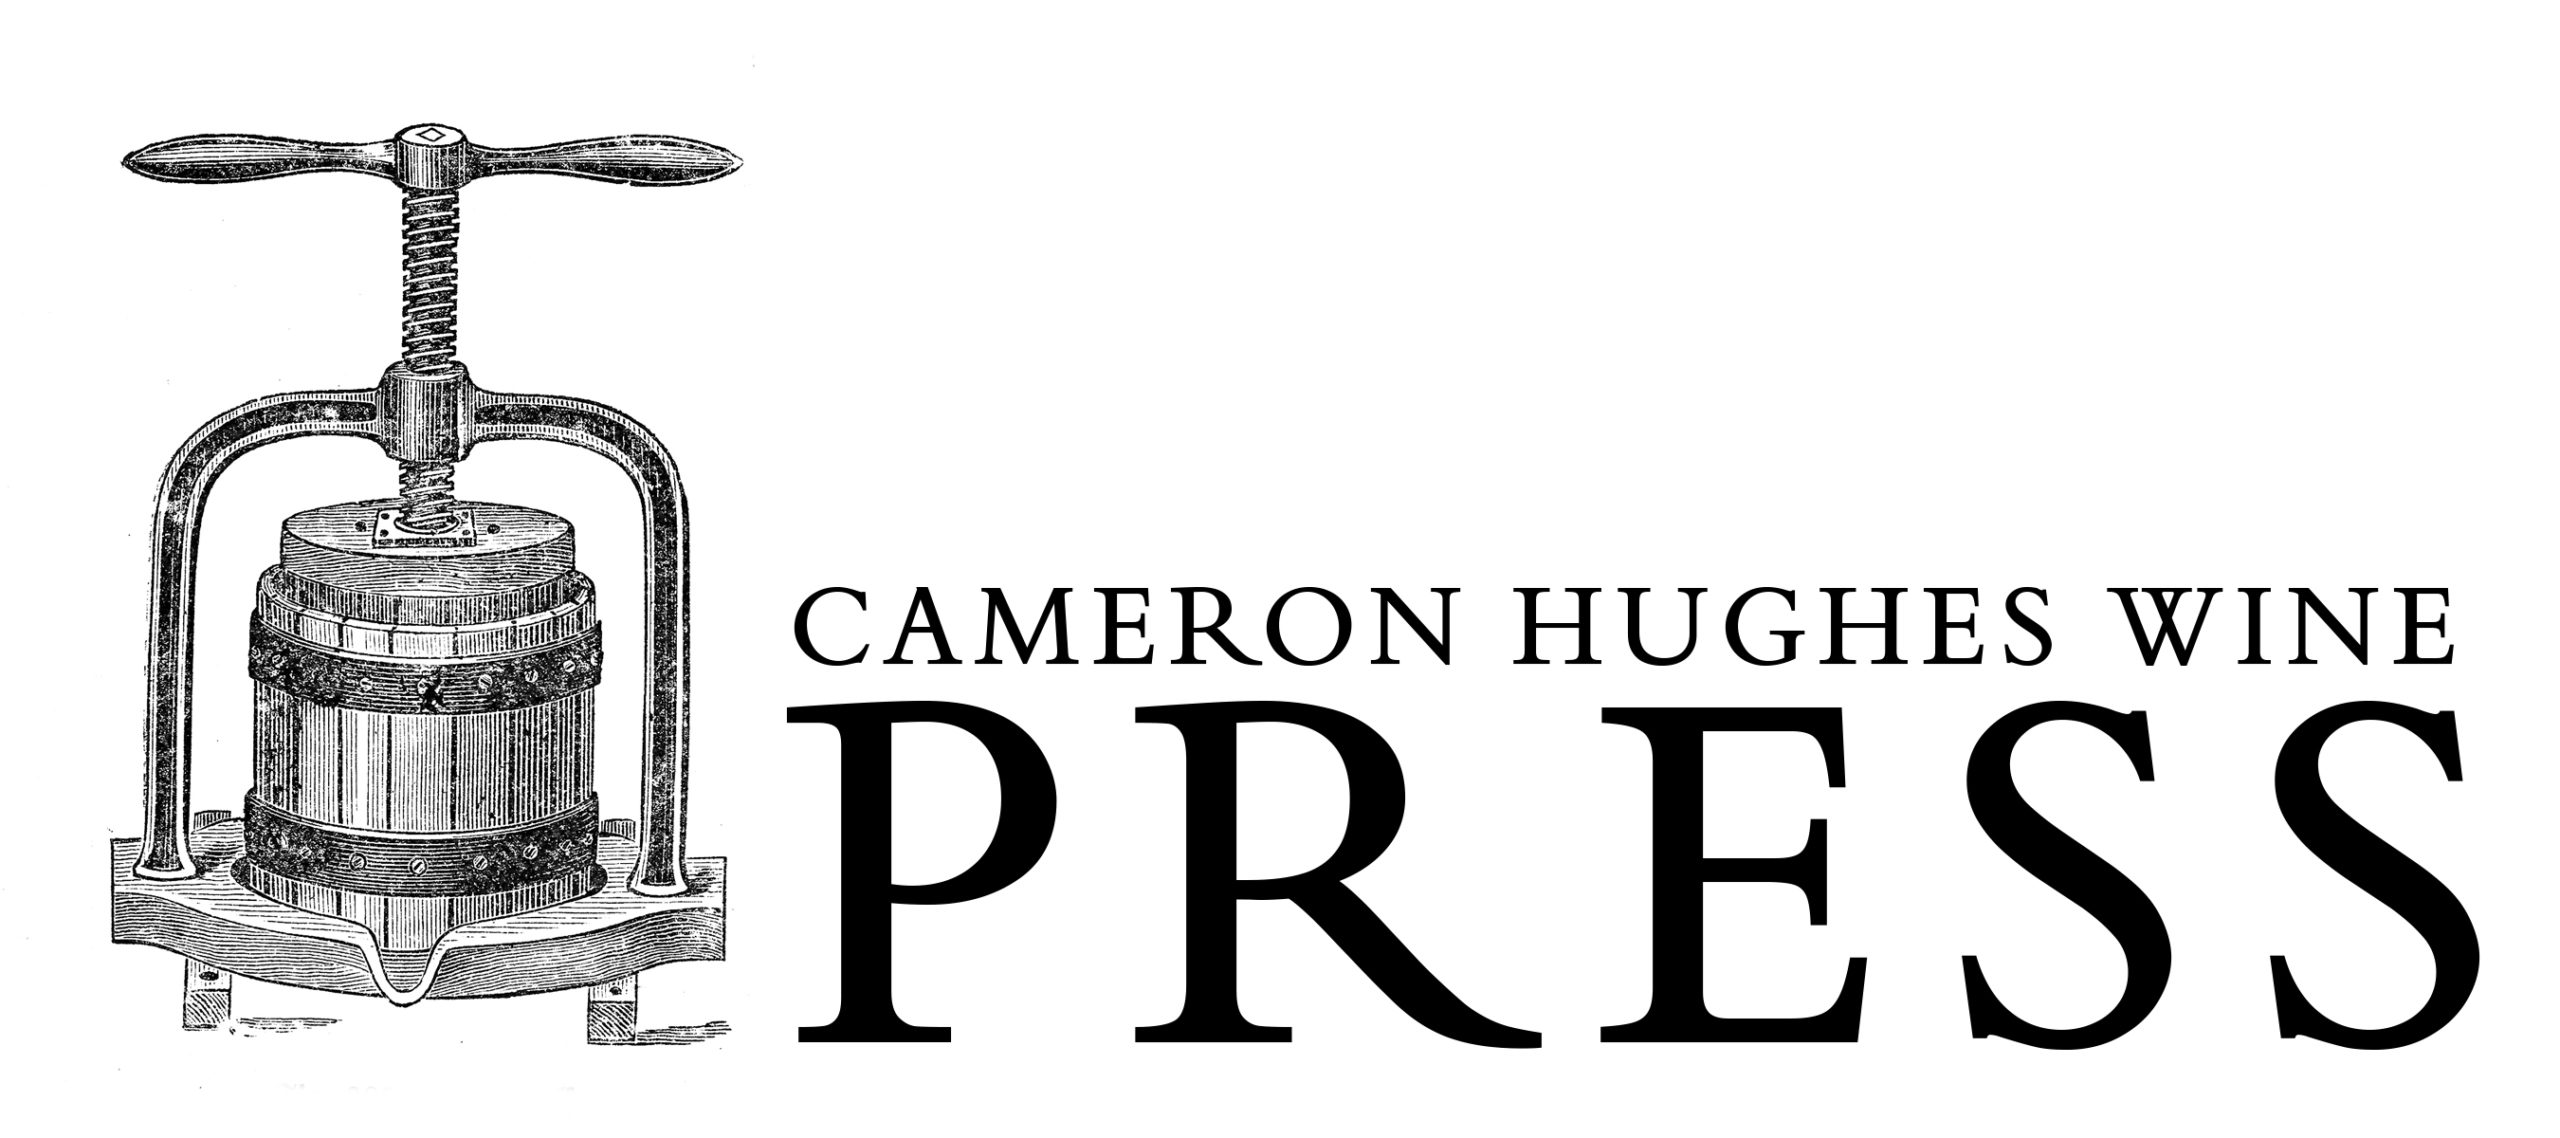 Cameron Hughes Wine Press logo showing an old-fashioned manual wine press